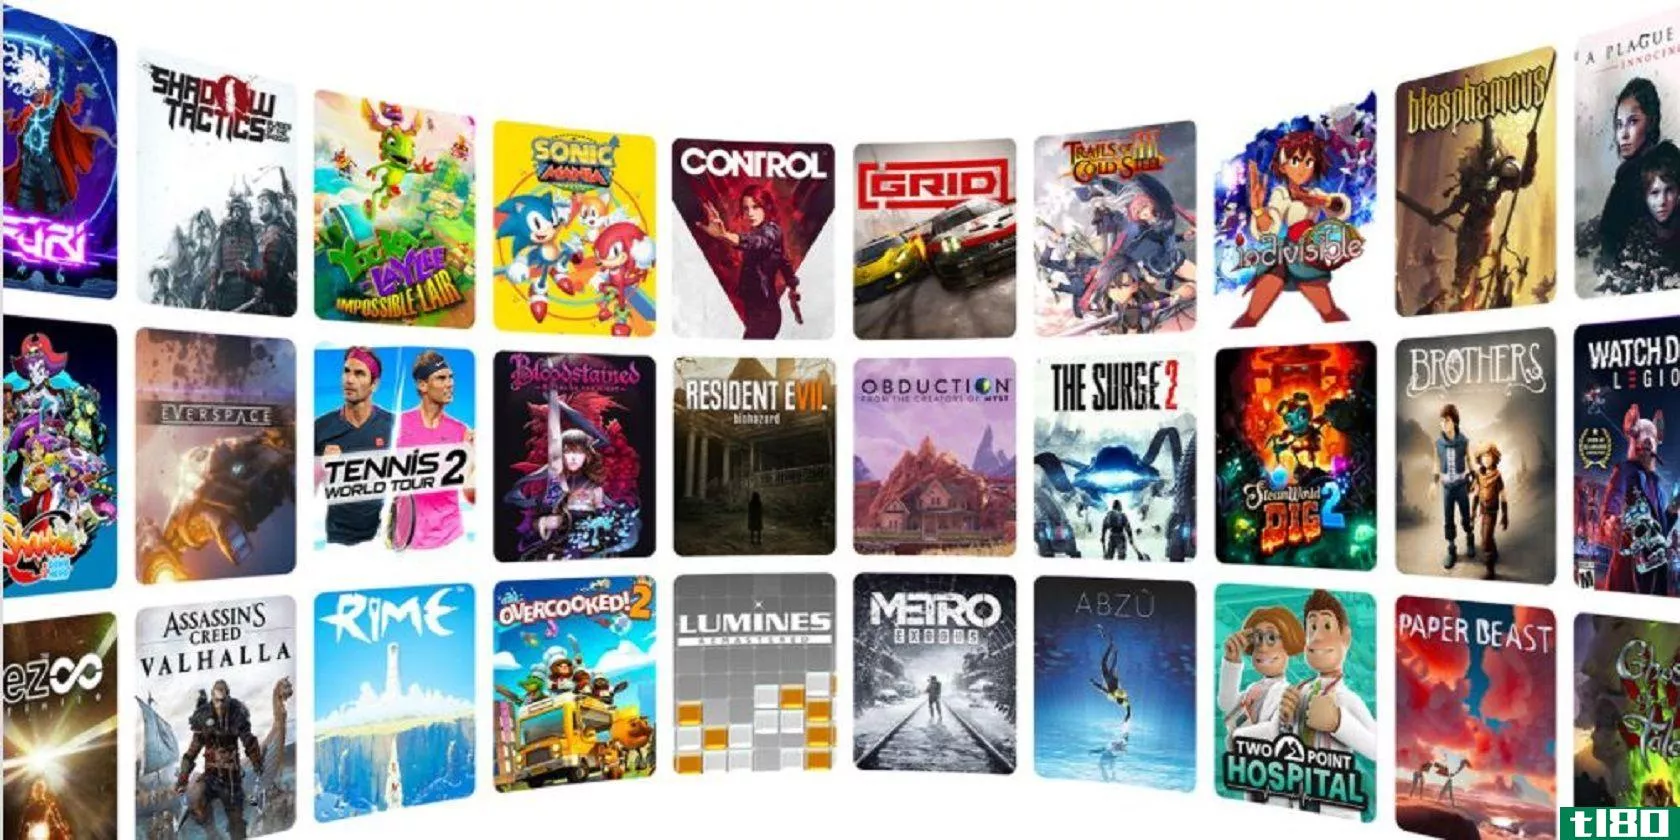 Amazon Luna advertises a number of available games.